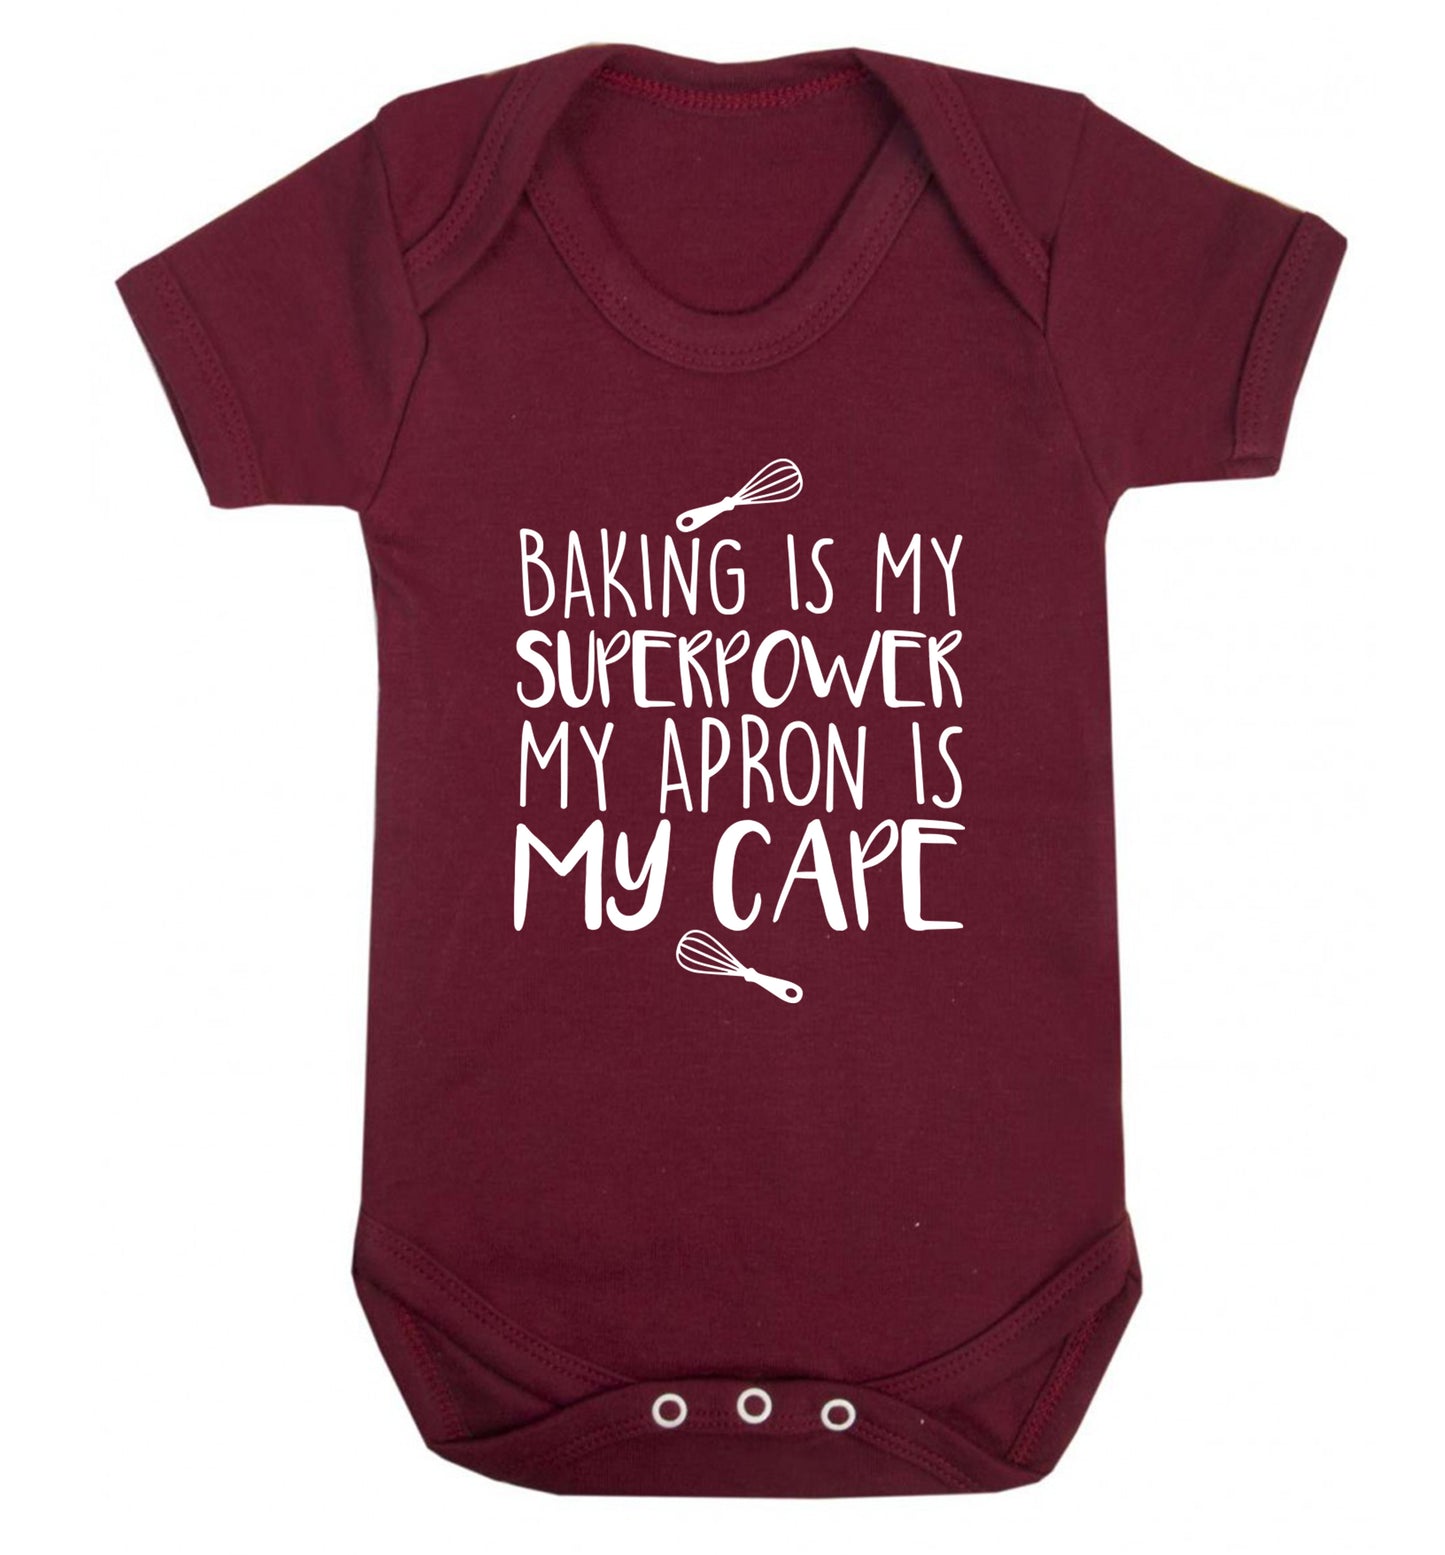 Baking is my superpower my apron is my cape Baby Vest maroon 18-24 months